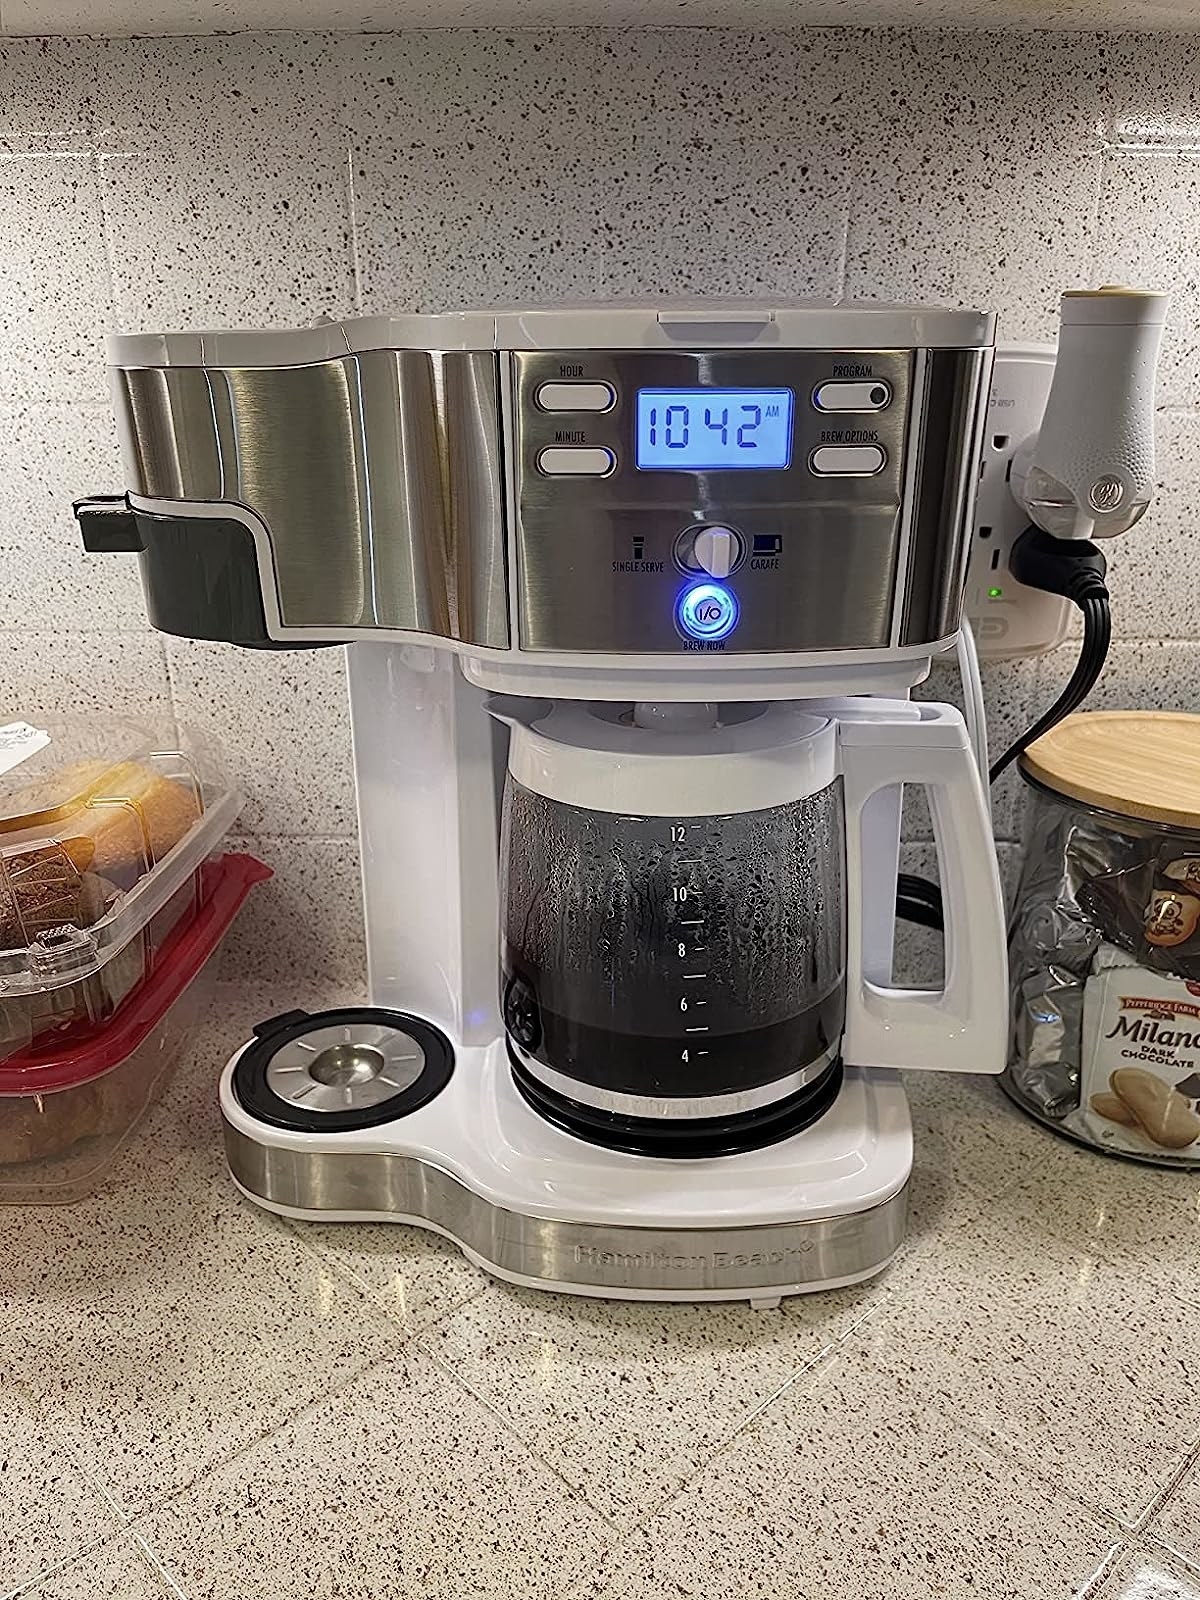 Reviewer image of the white coffee pot on their kitchen countertop